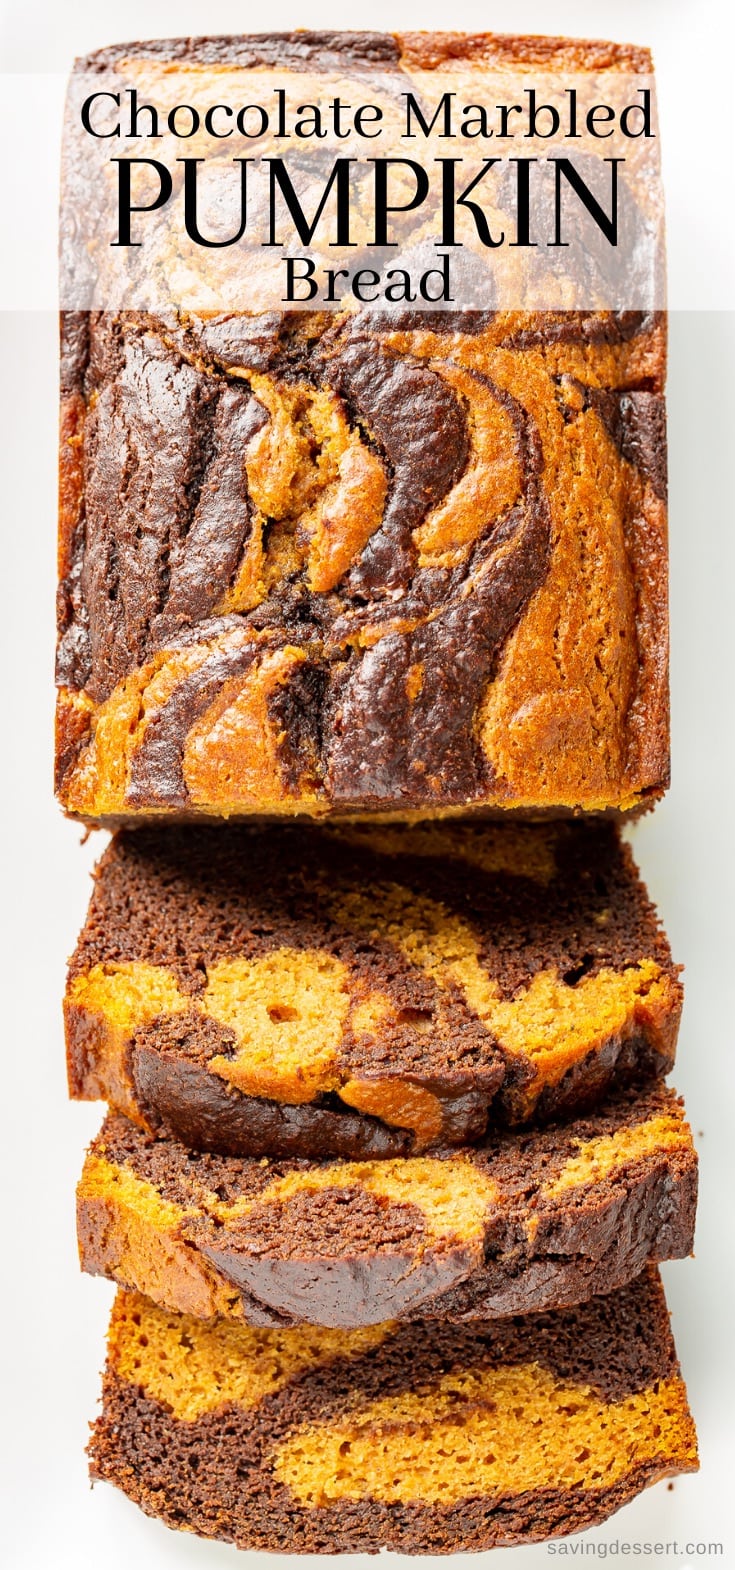 An overhead view of chocolate marbled pumpkin bread, sliced